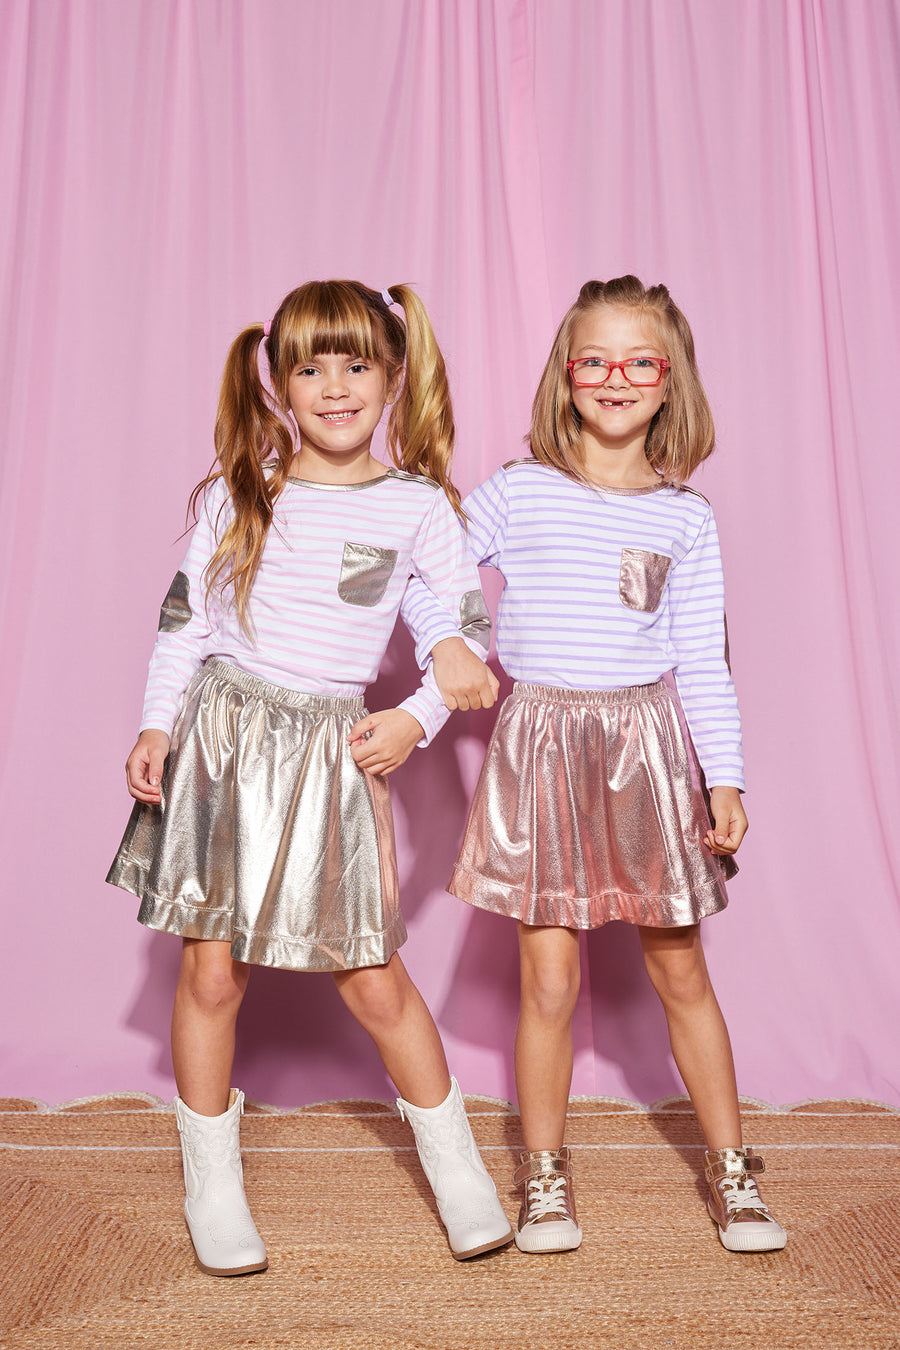 BISBY models can be seen wearing our Circle Skirts in Gold Lame and Pink Lame. Easily pair our Breton Top in Lilac Stripe or Pink Stripe to complete the look-BISBY girl